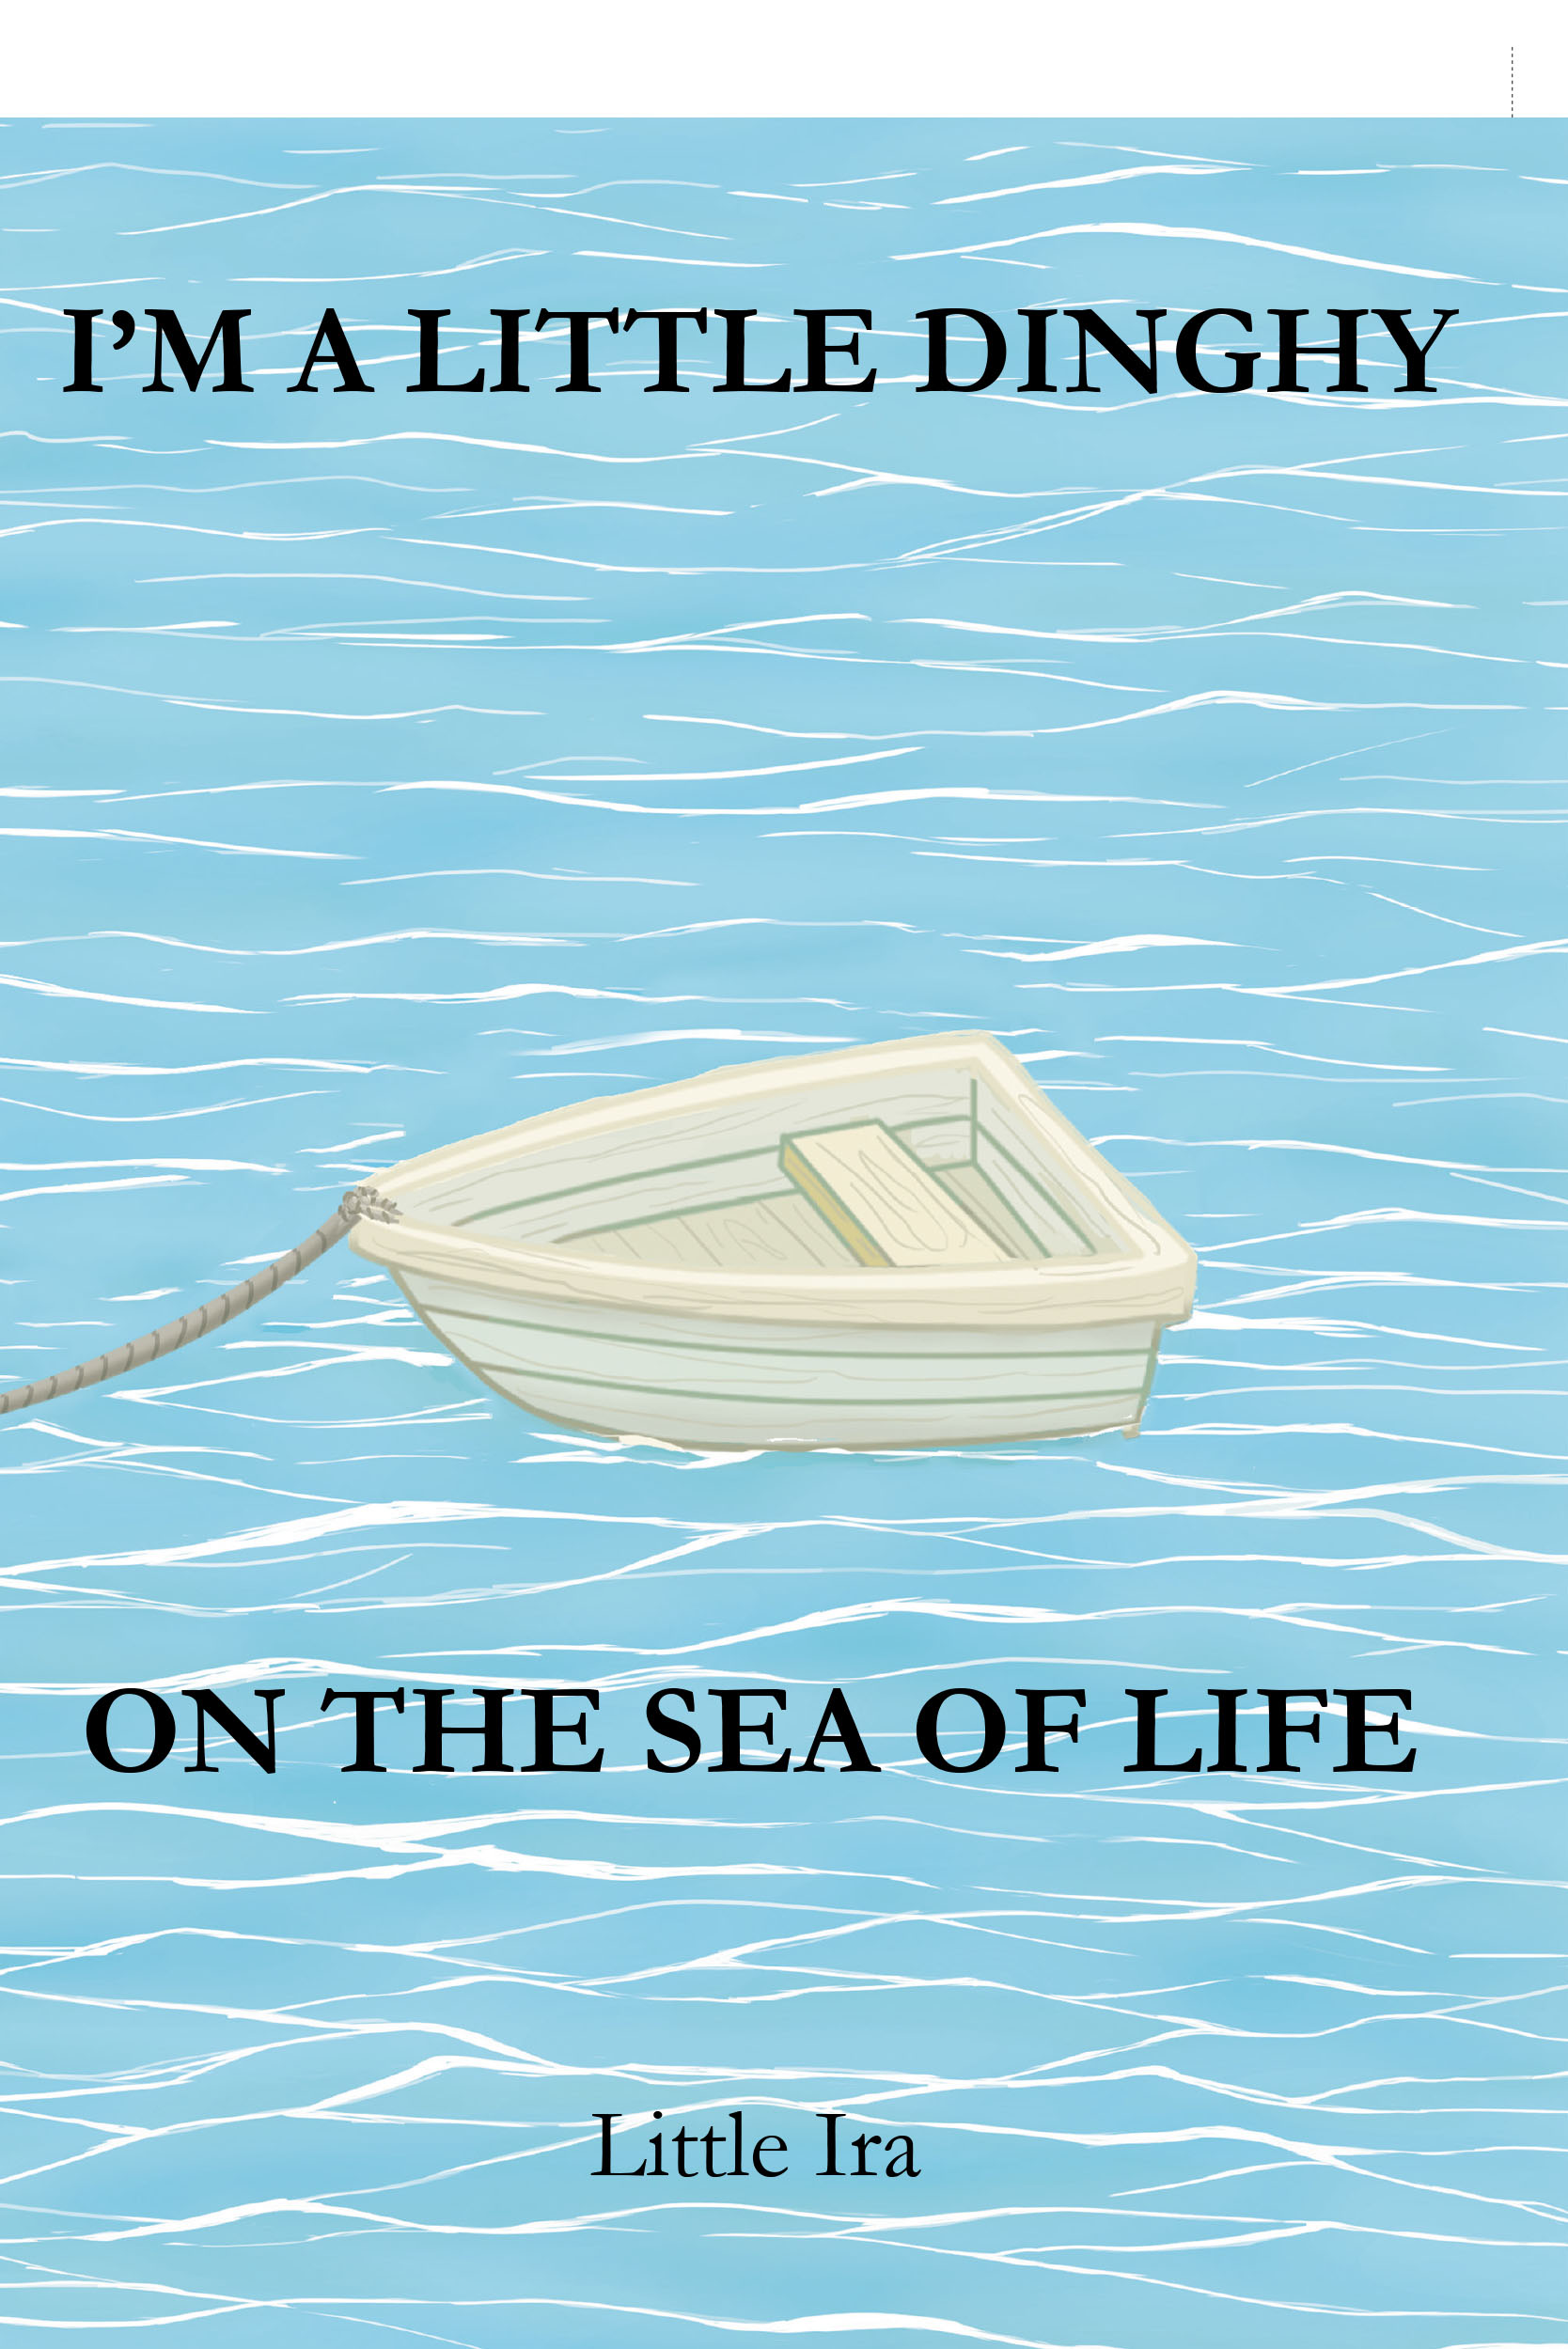 Little Ira’s Book, "I'm a Little Dinghy on the Sea of Life," is a Captivating Account of the Author’s Life and the Challenges She Faced Along the Way